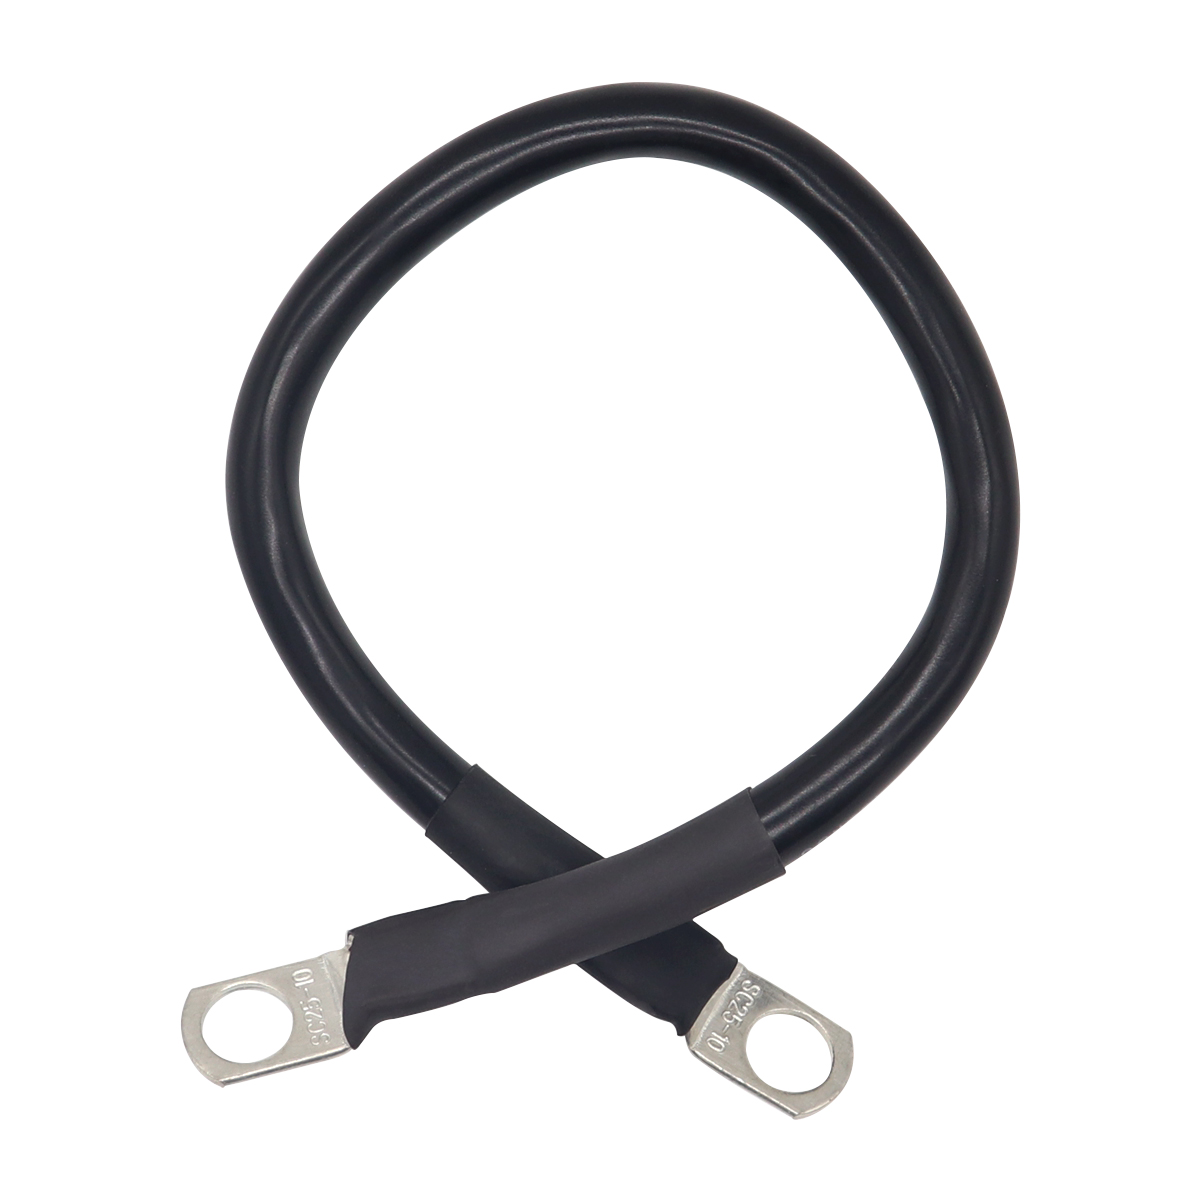  Wholesale Custom 4awg Marine RV Battery Power Cable with M10 Ring Terminal